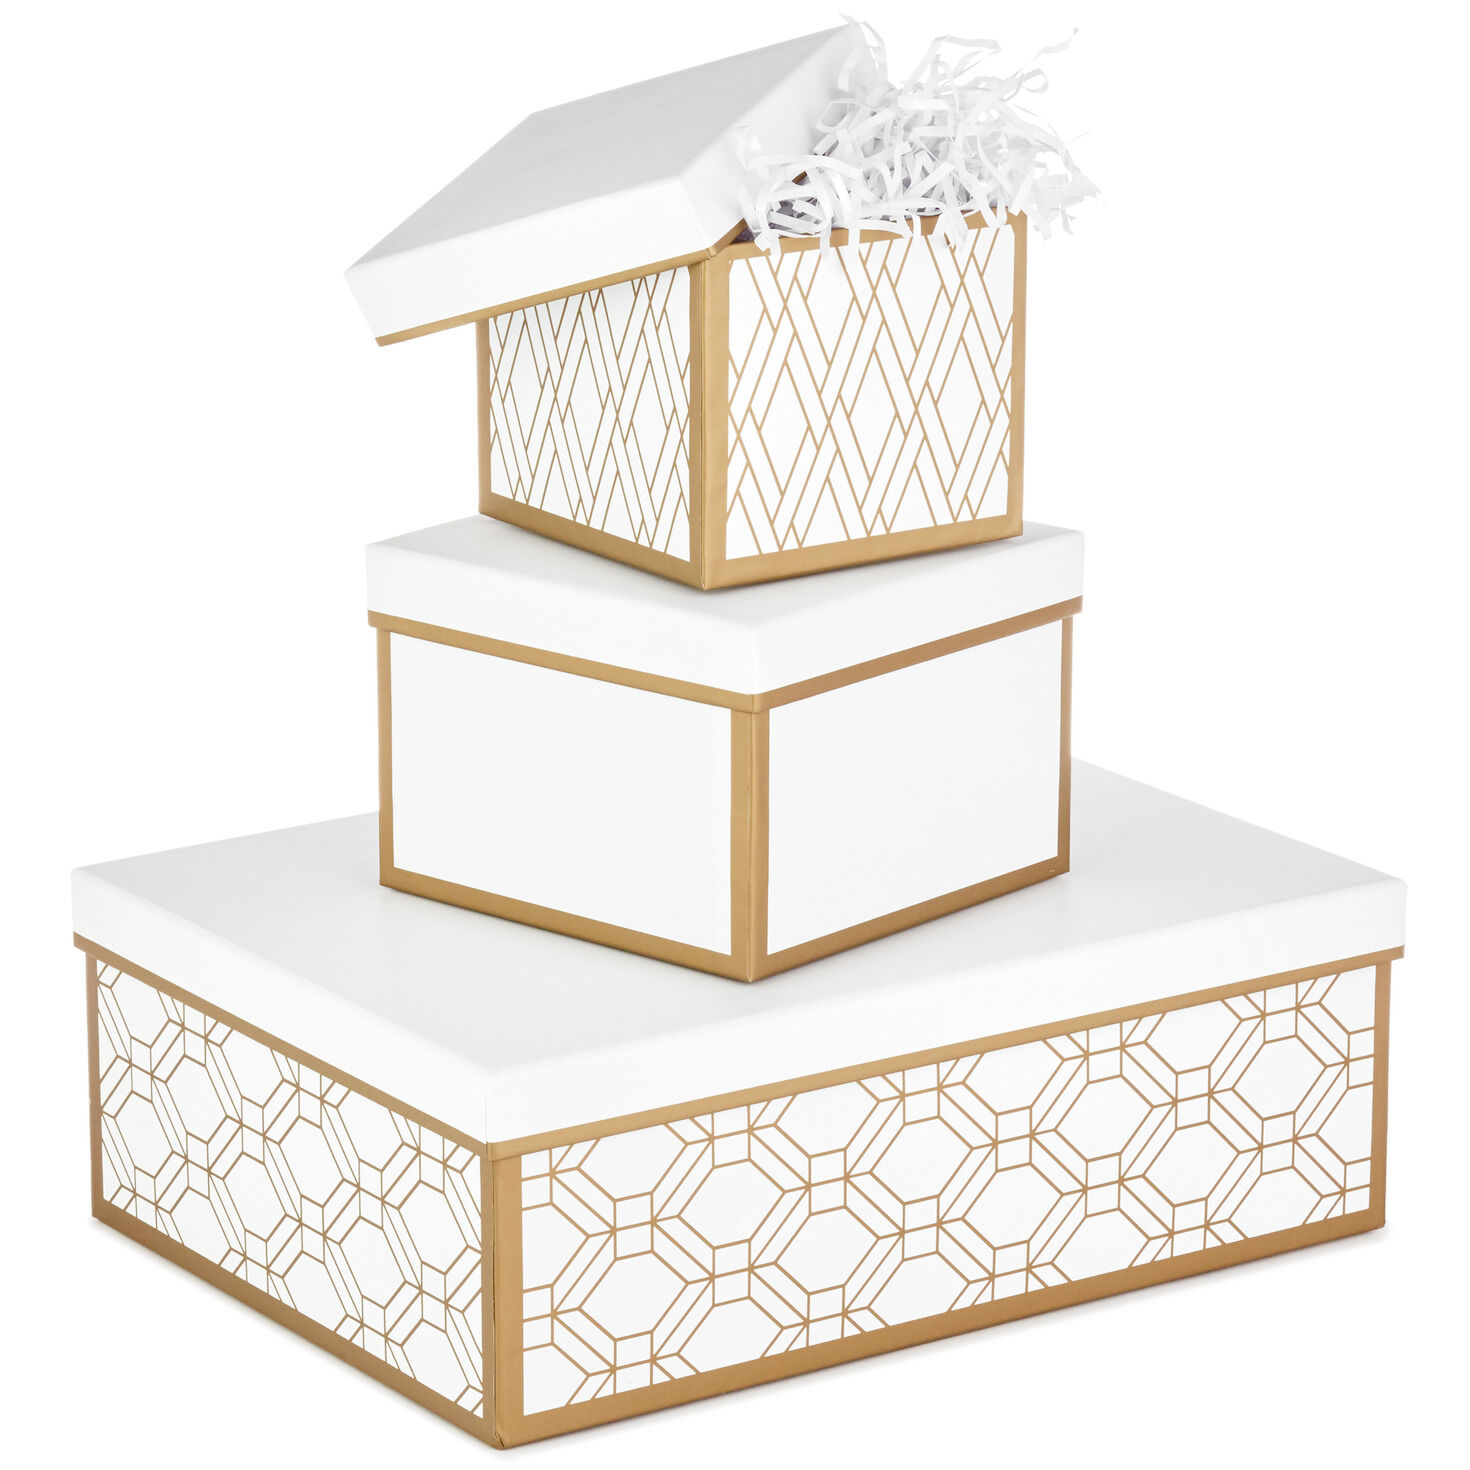 Nesting gift boxes. . .